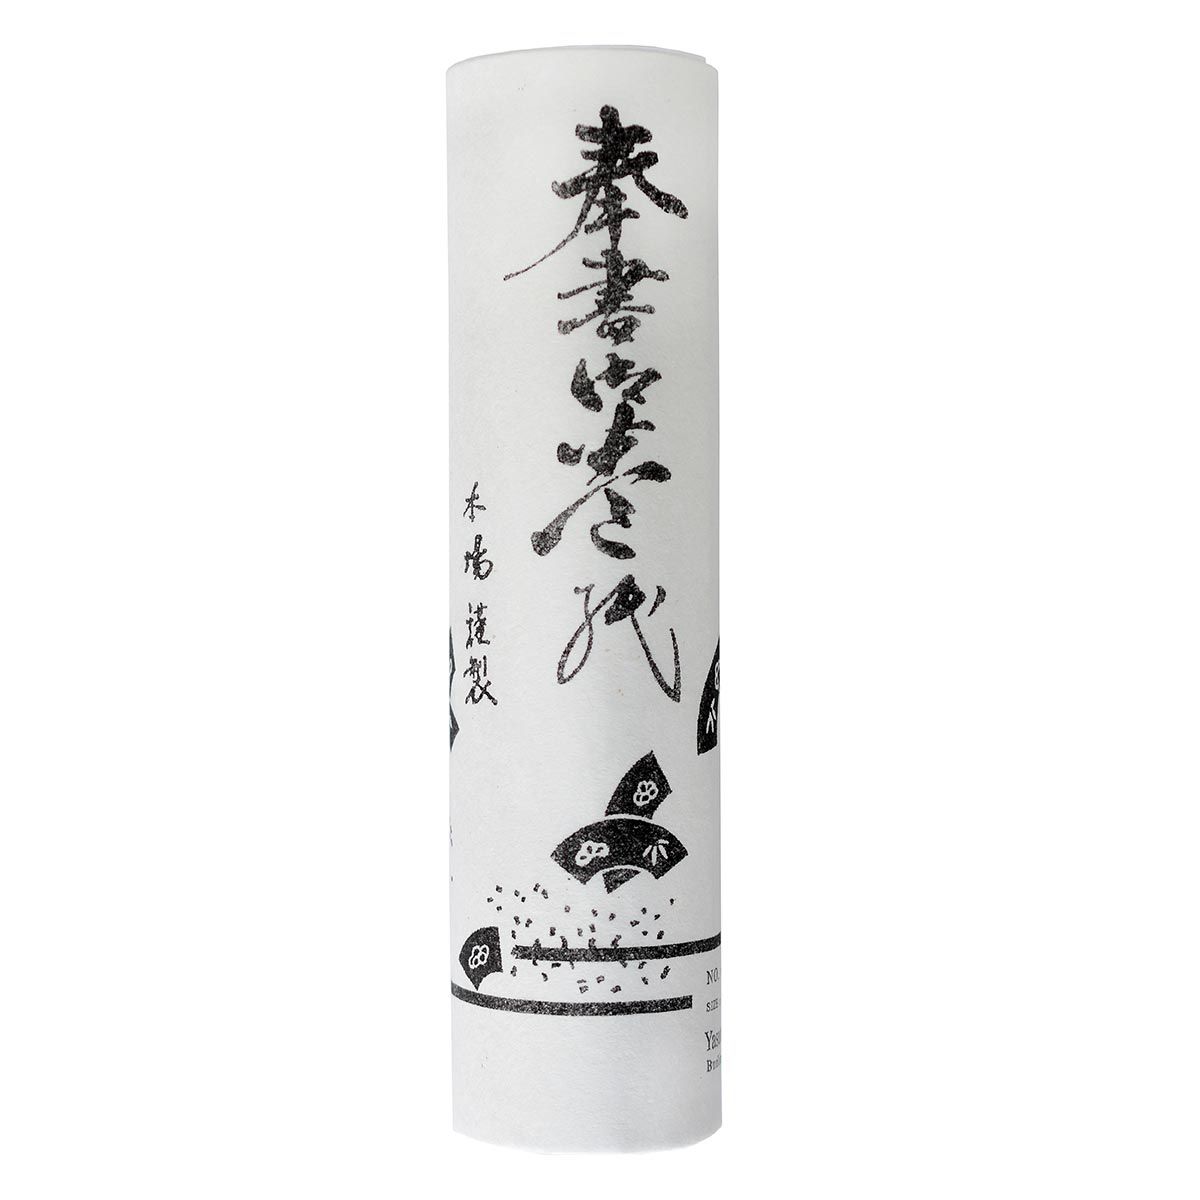 6M – 8″ x 20’ Hosho Paper Roll
This 20-foot roll of Hosho paper is 8” wide and is designed for use in Sumi-e, calligraphy, and paper crafts. It does not shrink or tear easily, making it ideal for the wood block or line printing. Hosho paper is a thick, s